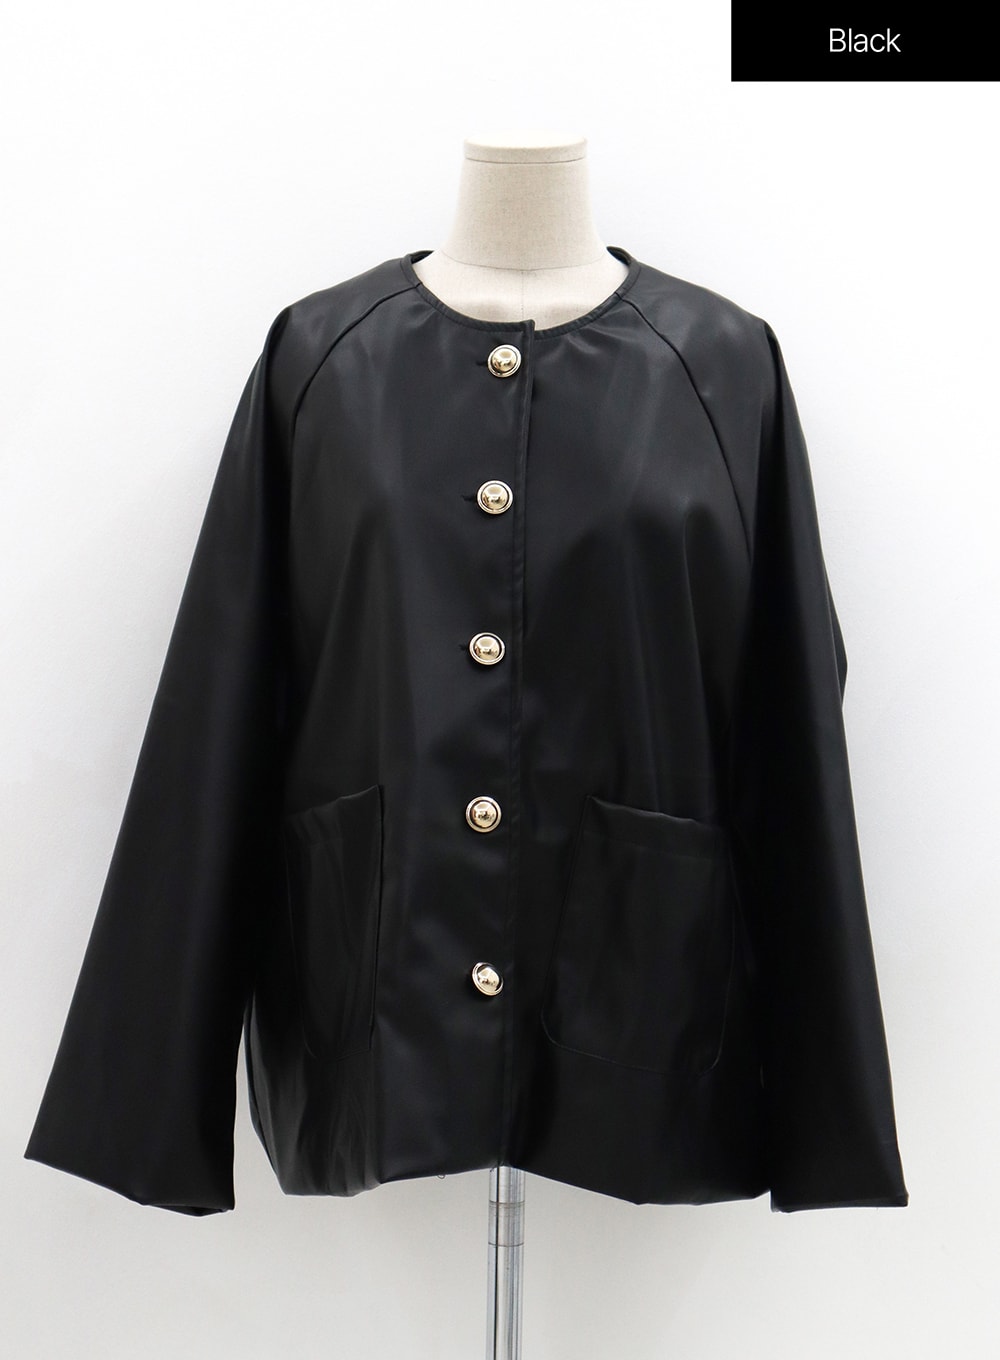 Plus V-Neck Gold Button Cutting Over Fit Jacket IS02